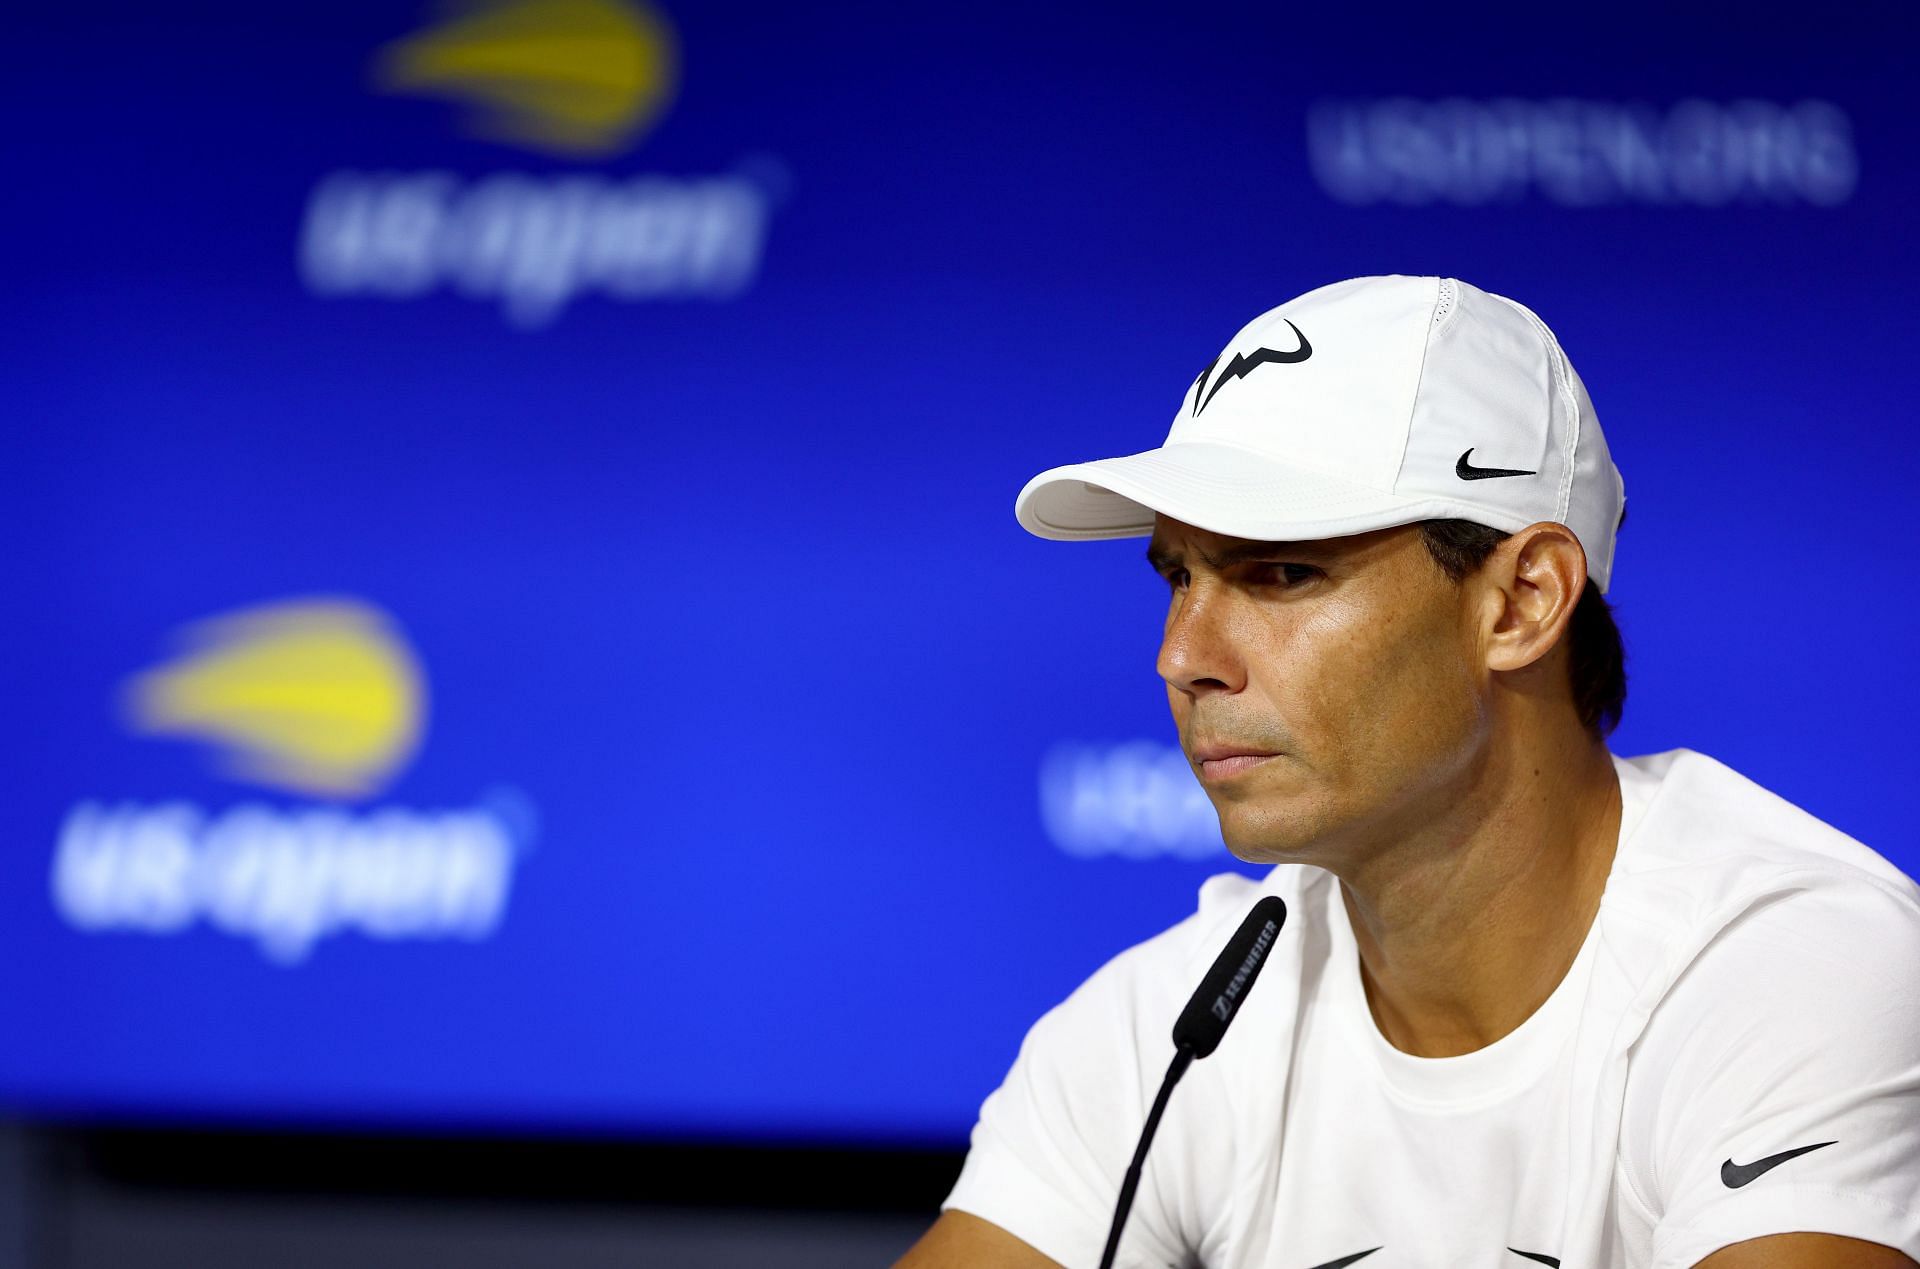 Rafael Nadal is the second seed at the 2022 US Open